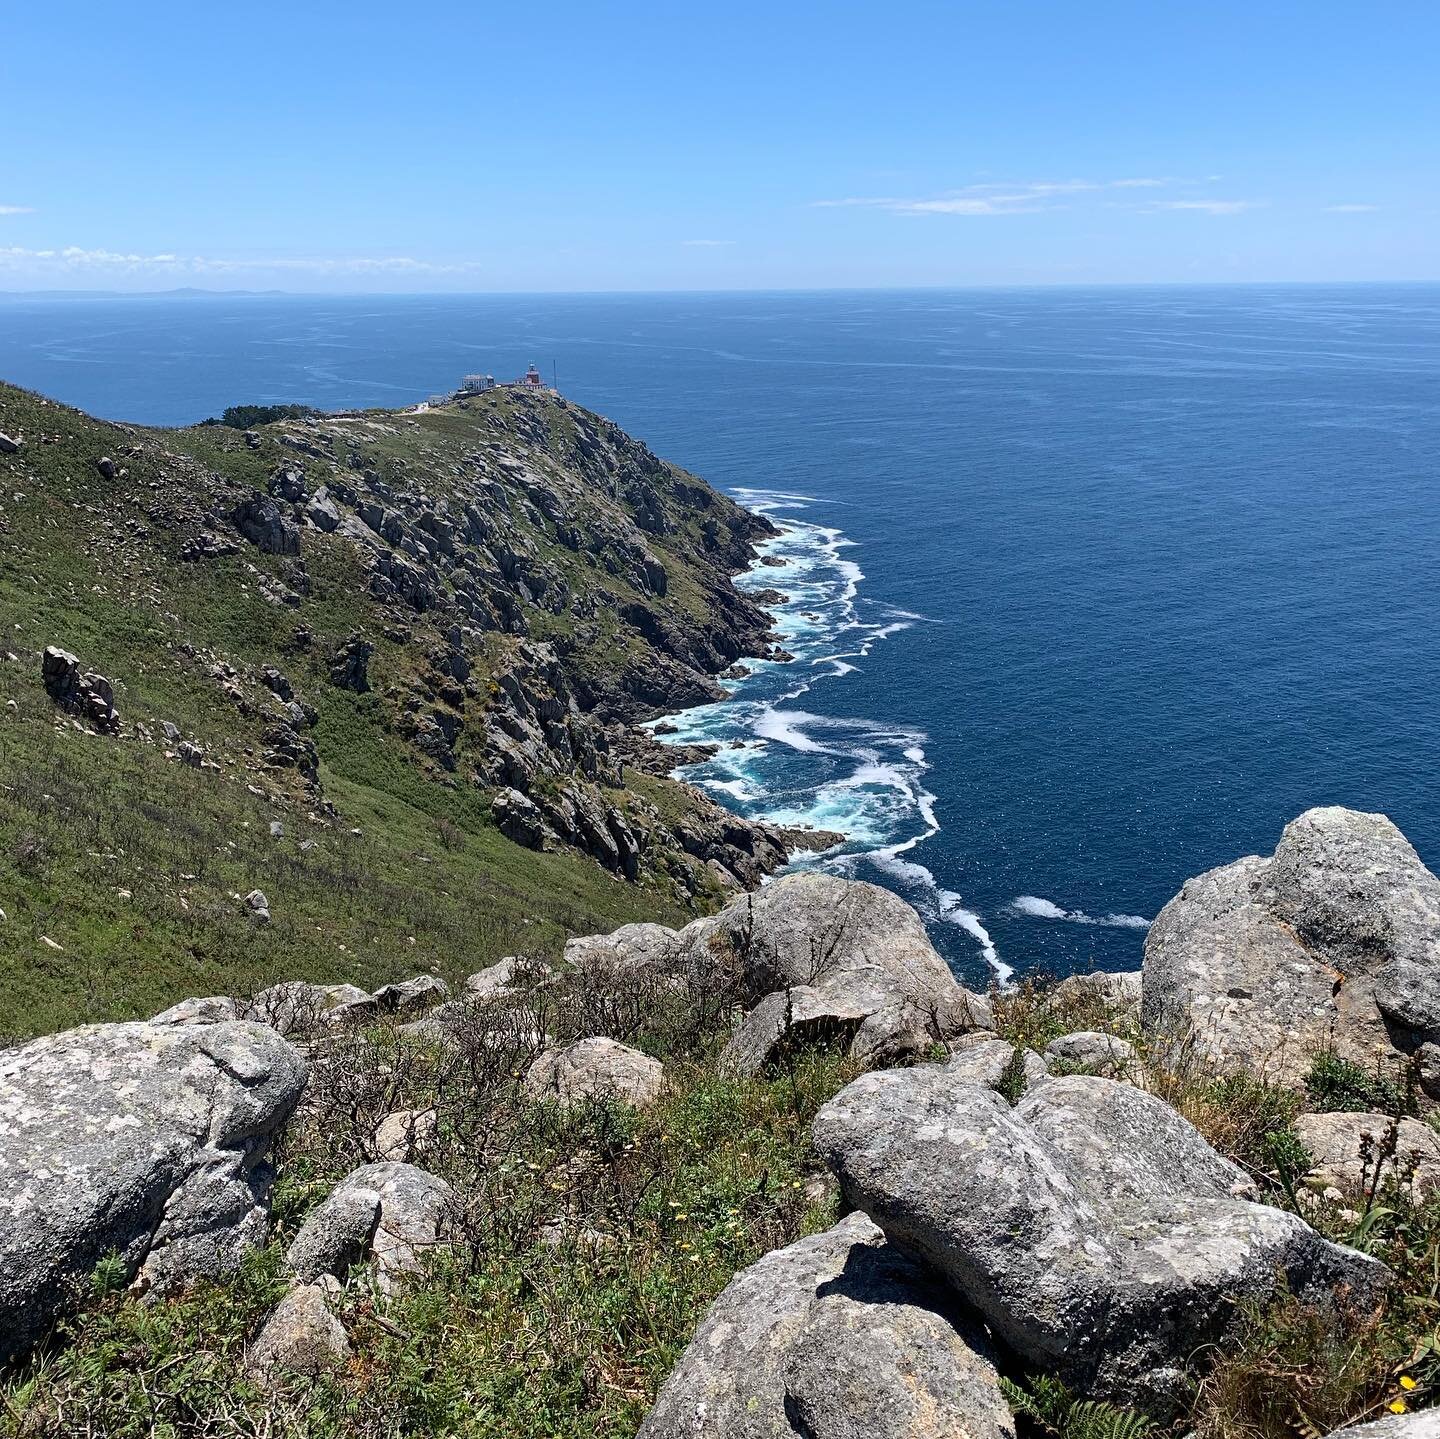 Finisterre (&lsquo;the end of the world&rsquo;) is one of the traditional end points of the Camino, where the path meets the Atlantic Ocean with a dramatic drop-off! This sleepy town with a magical coastline was the perfect place to rest, write and, 